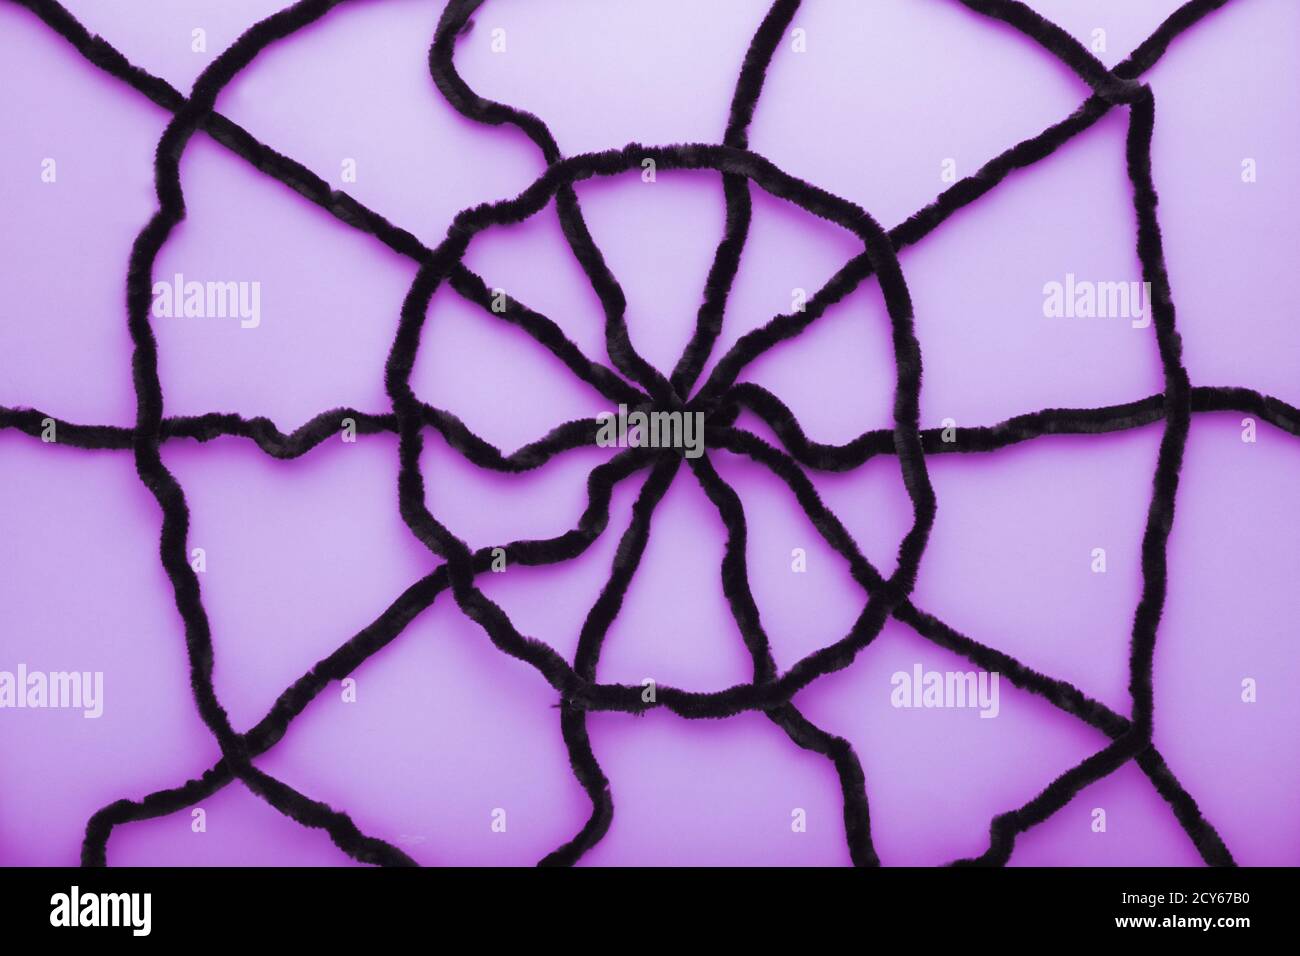 Giant spider web on a puple background. Halloween decorations concept. Flat lay, top view, copy space. Stock Photo